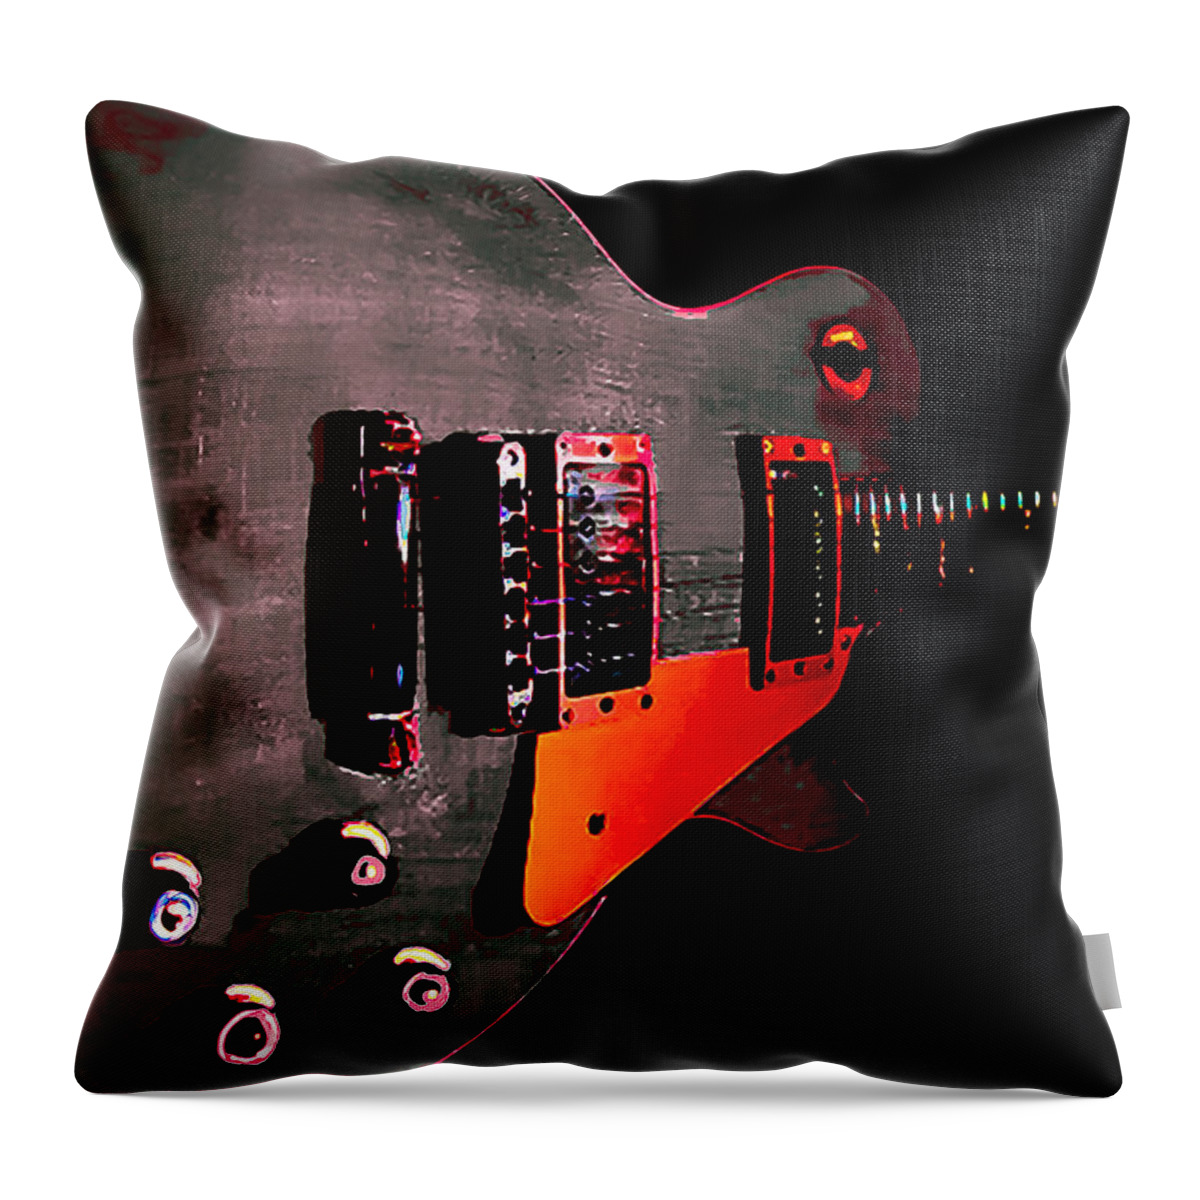 Guitar Throw Pillow featuring the digital art Ebony Relic Guitar Hover Series by Guitarwacky Fine Art